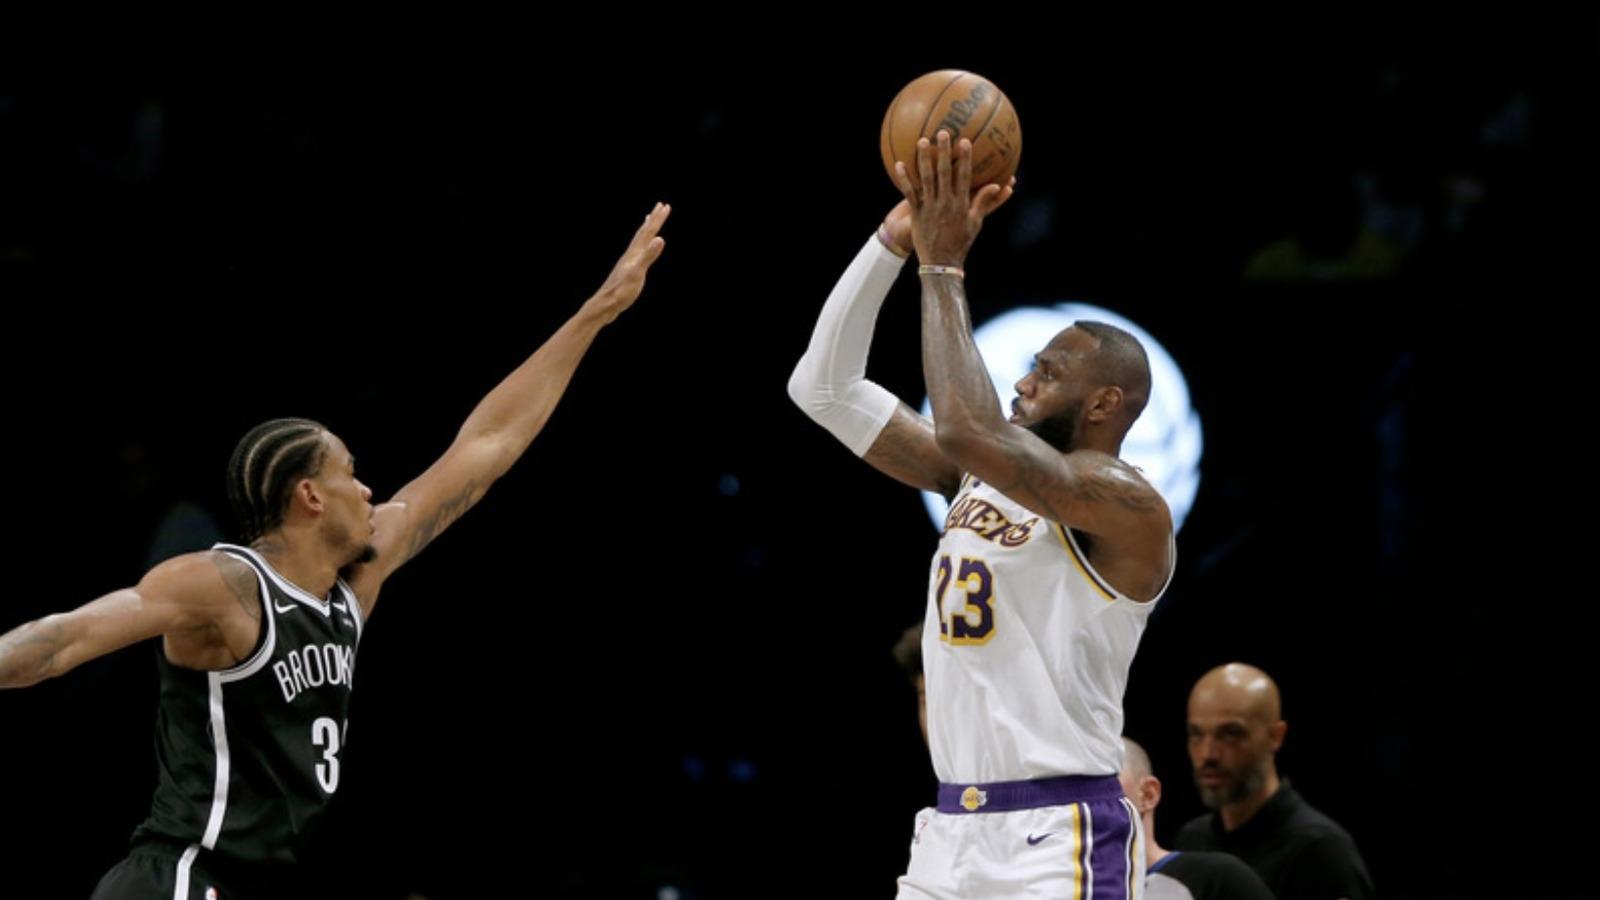 Lakers star LeBron James put up a spectacular performance vs. the Nets